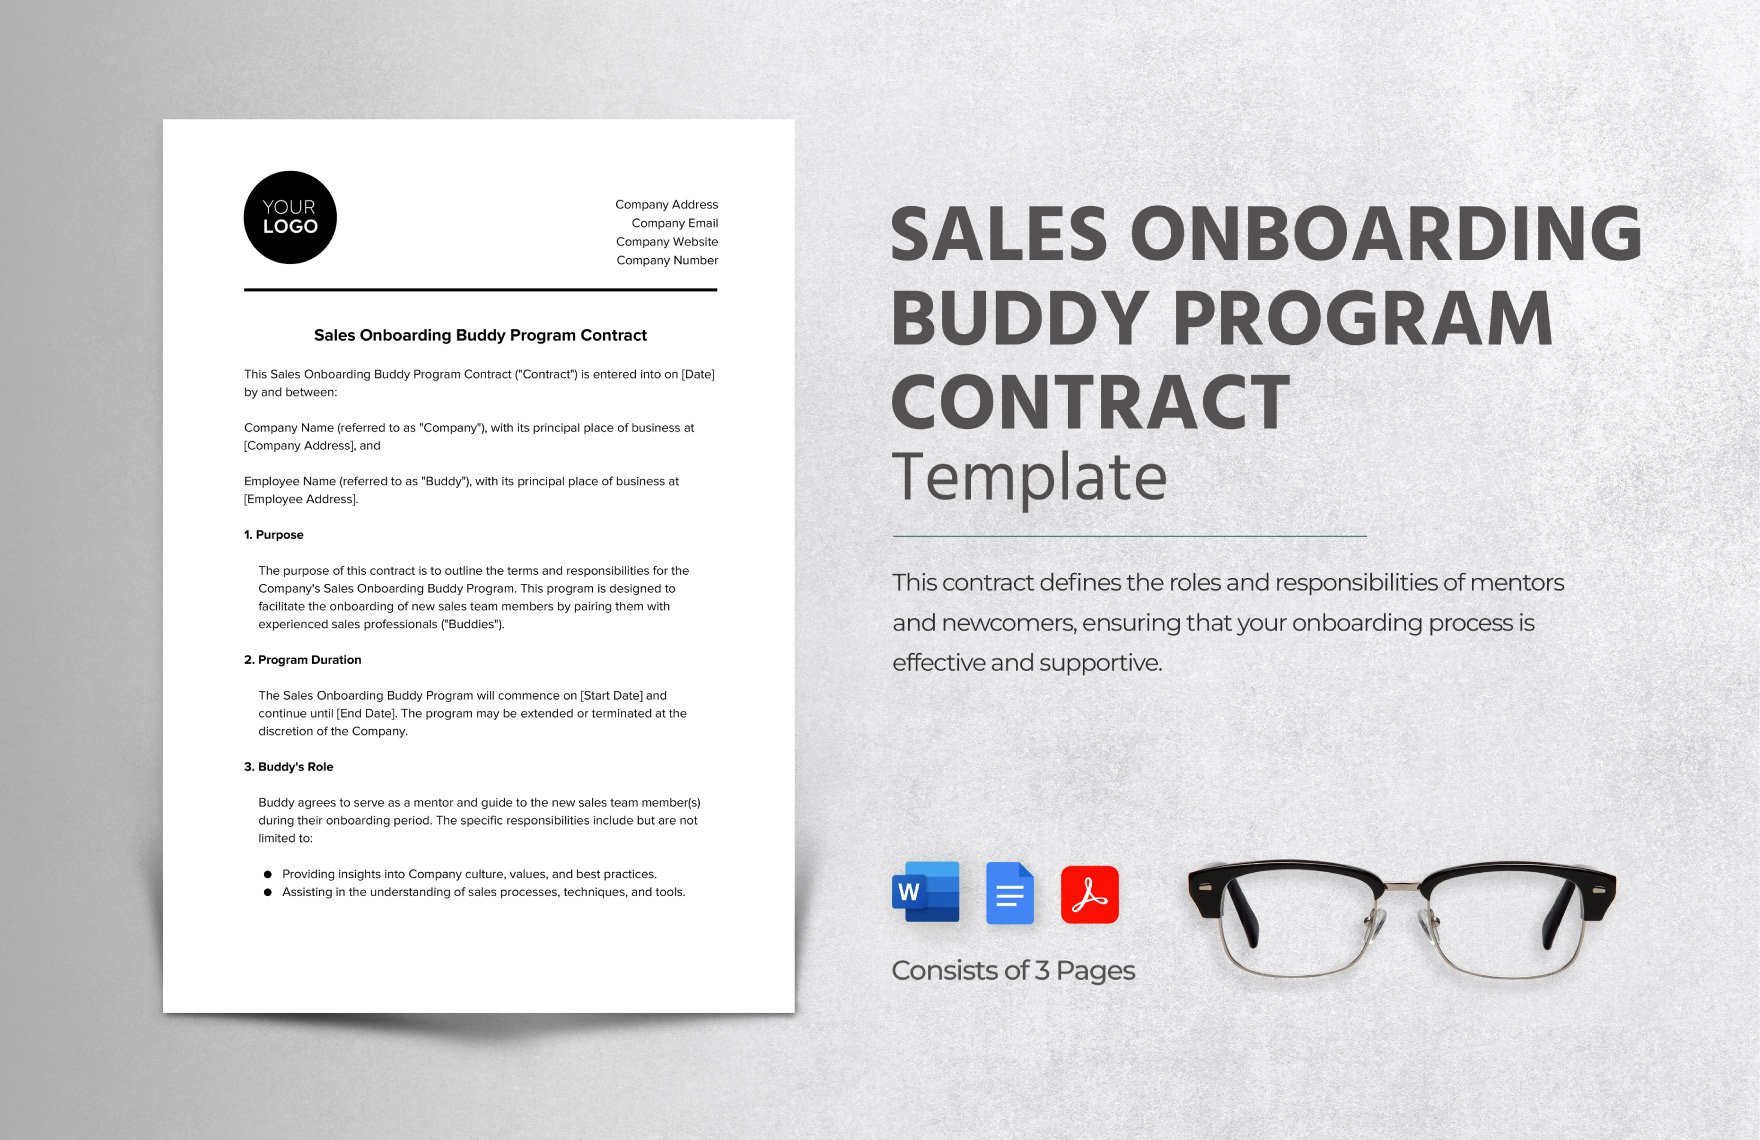 Sales Onboarding Buddy Program Contract Template